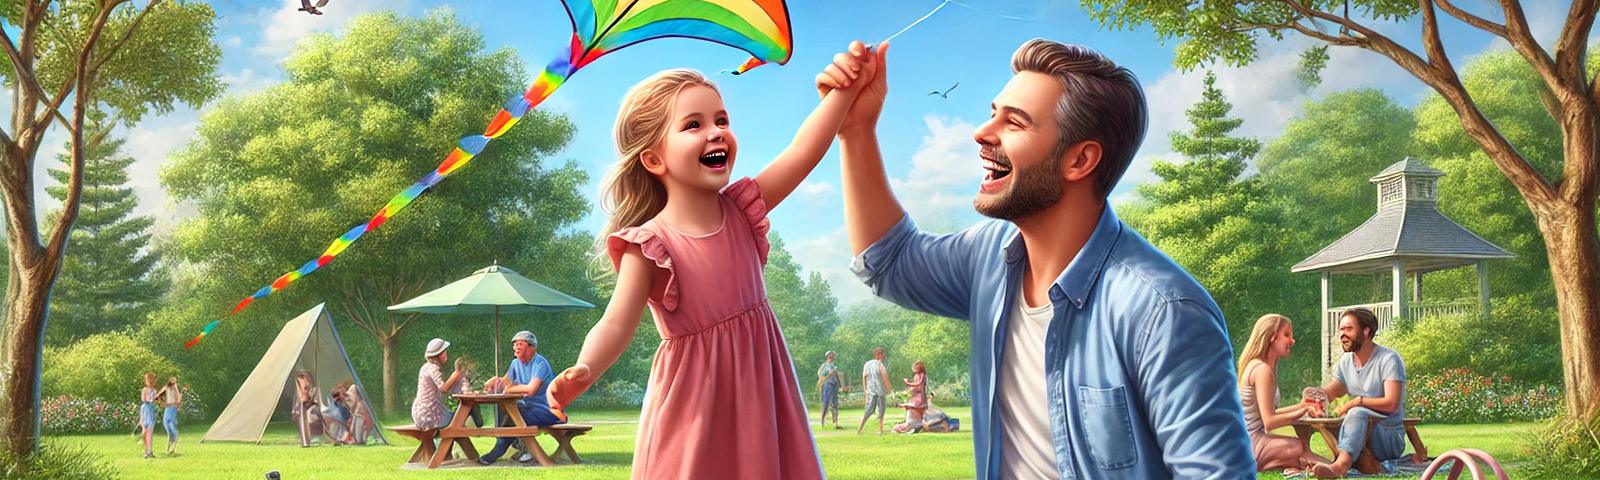 Little Emma and her dad enjoying a joyful moment together in a park, where they are flying a kite during a picnic. This scene captures their happiness in sharing simple pleasures.